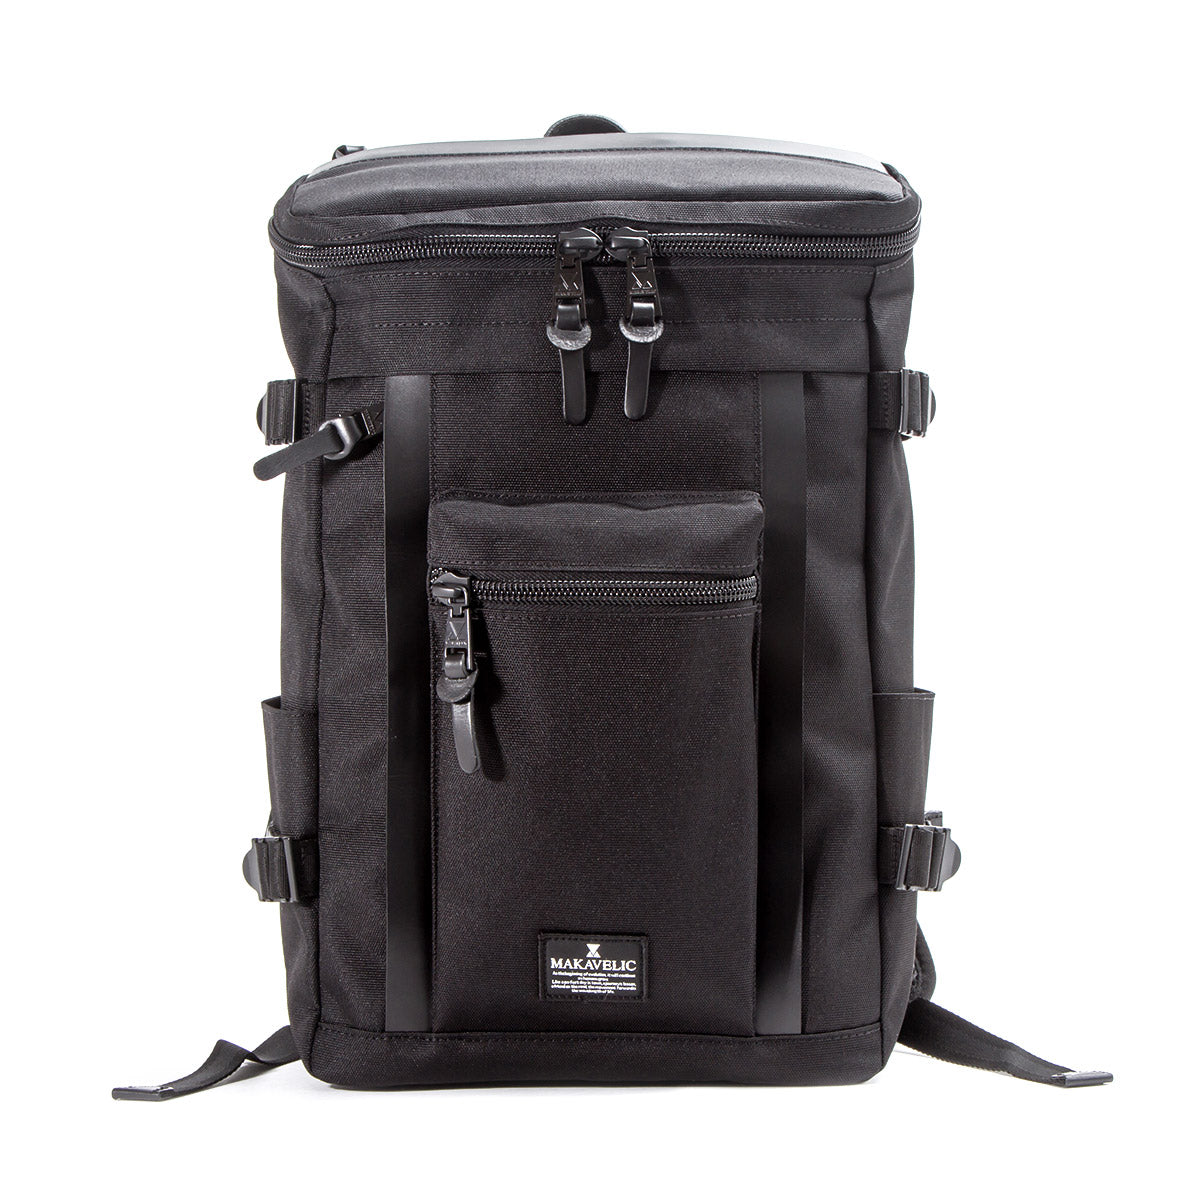 MAKAVELIC マキャベリック リュック CHASE RECT. DAYPACK ...